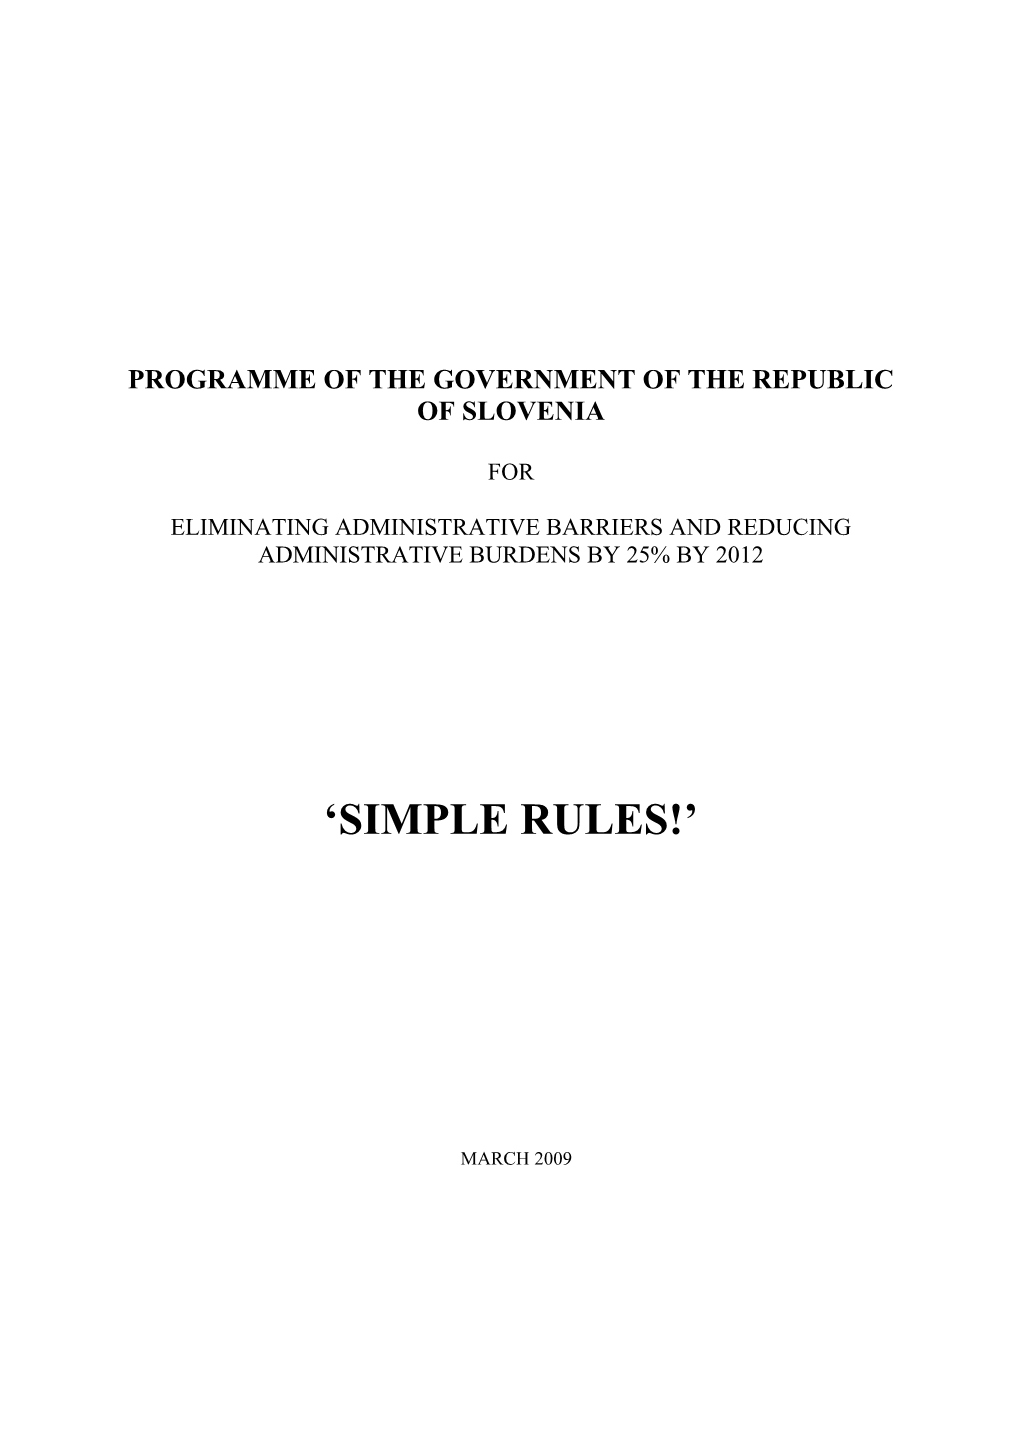 Programme of the Government of the Republic of Slovenia